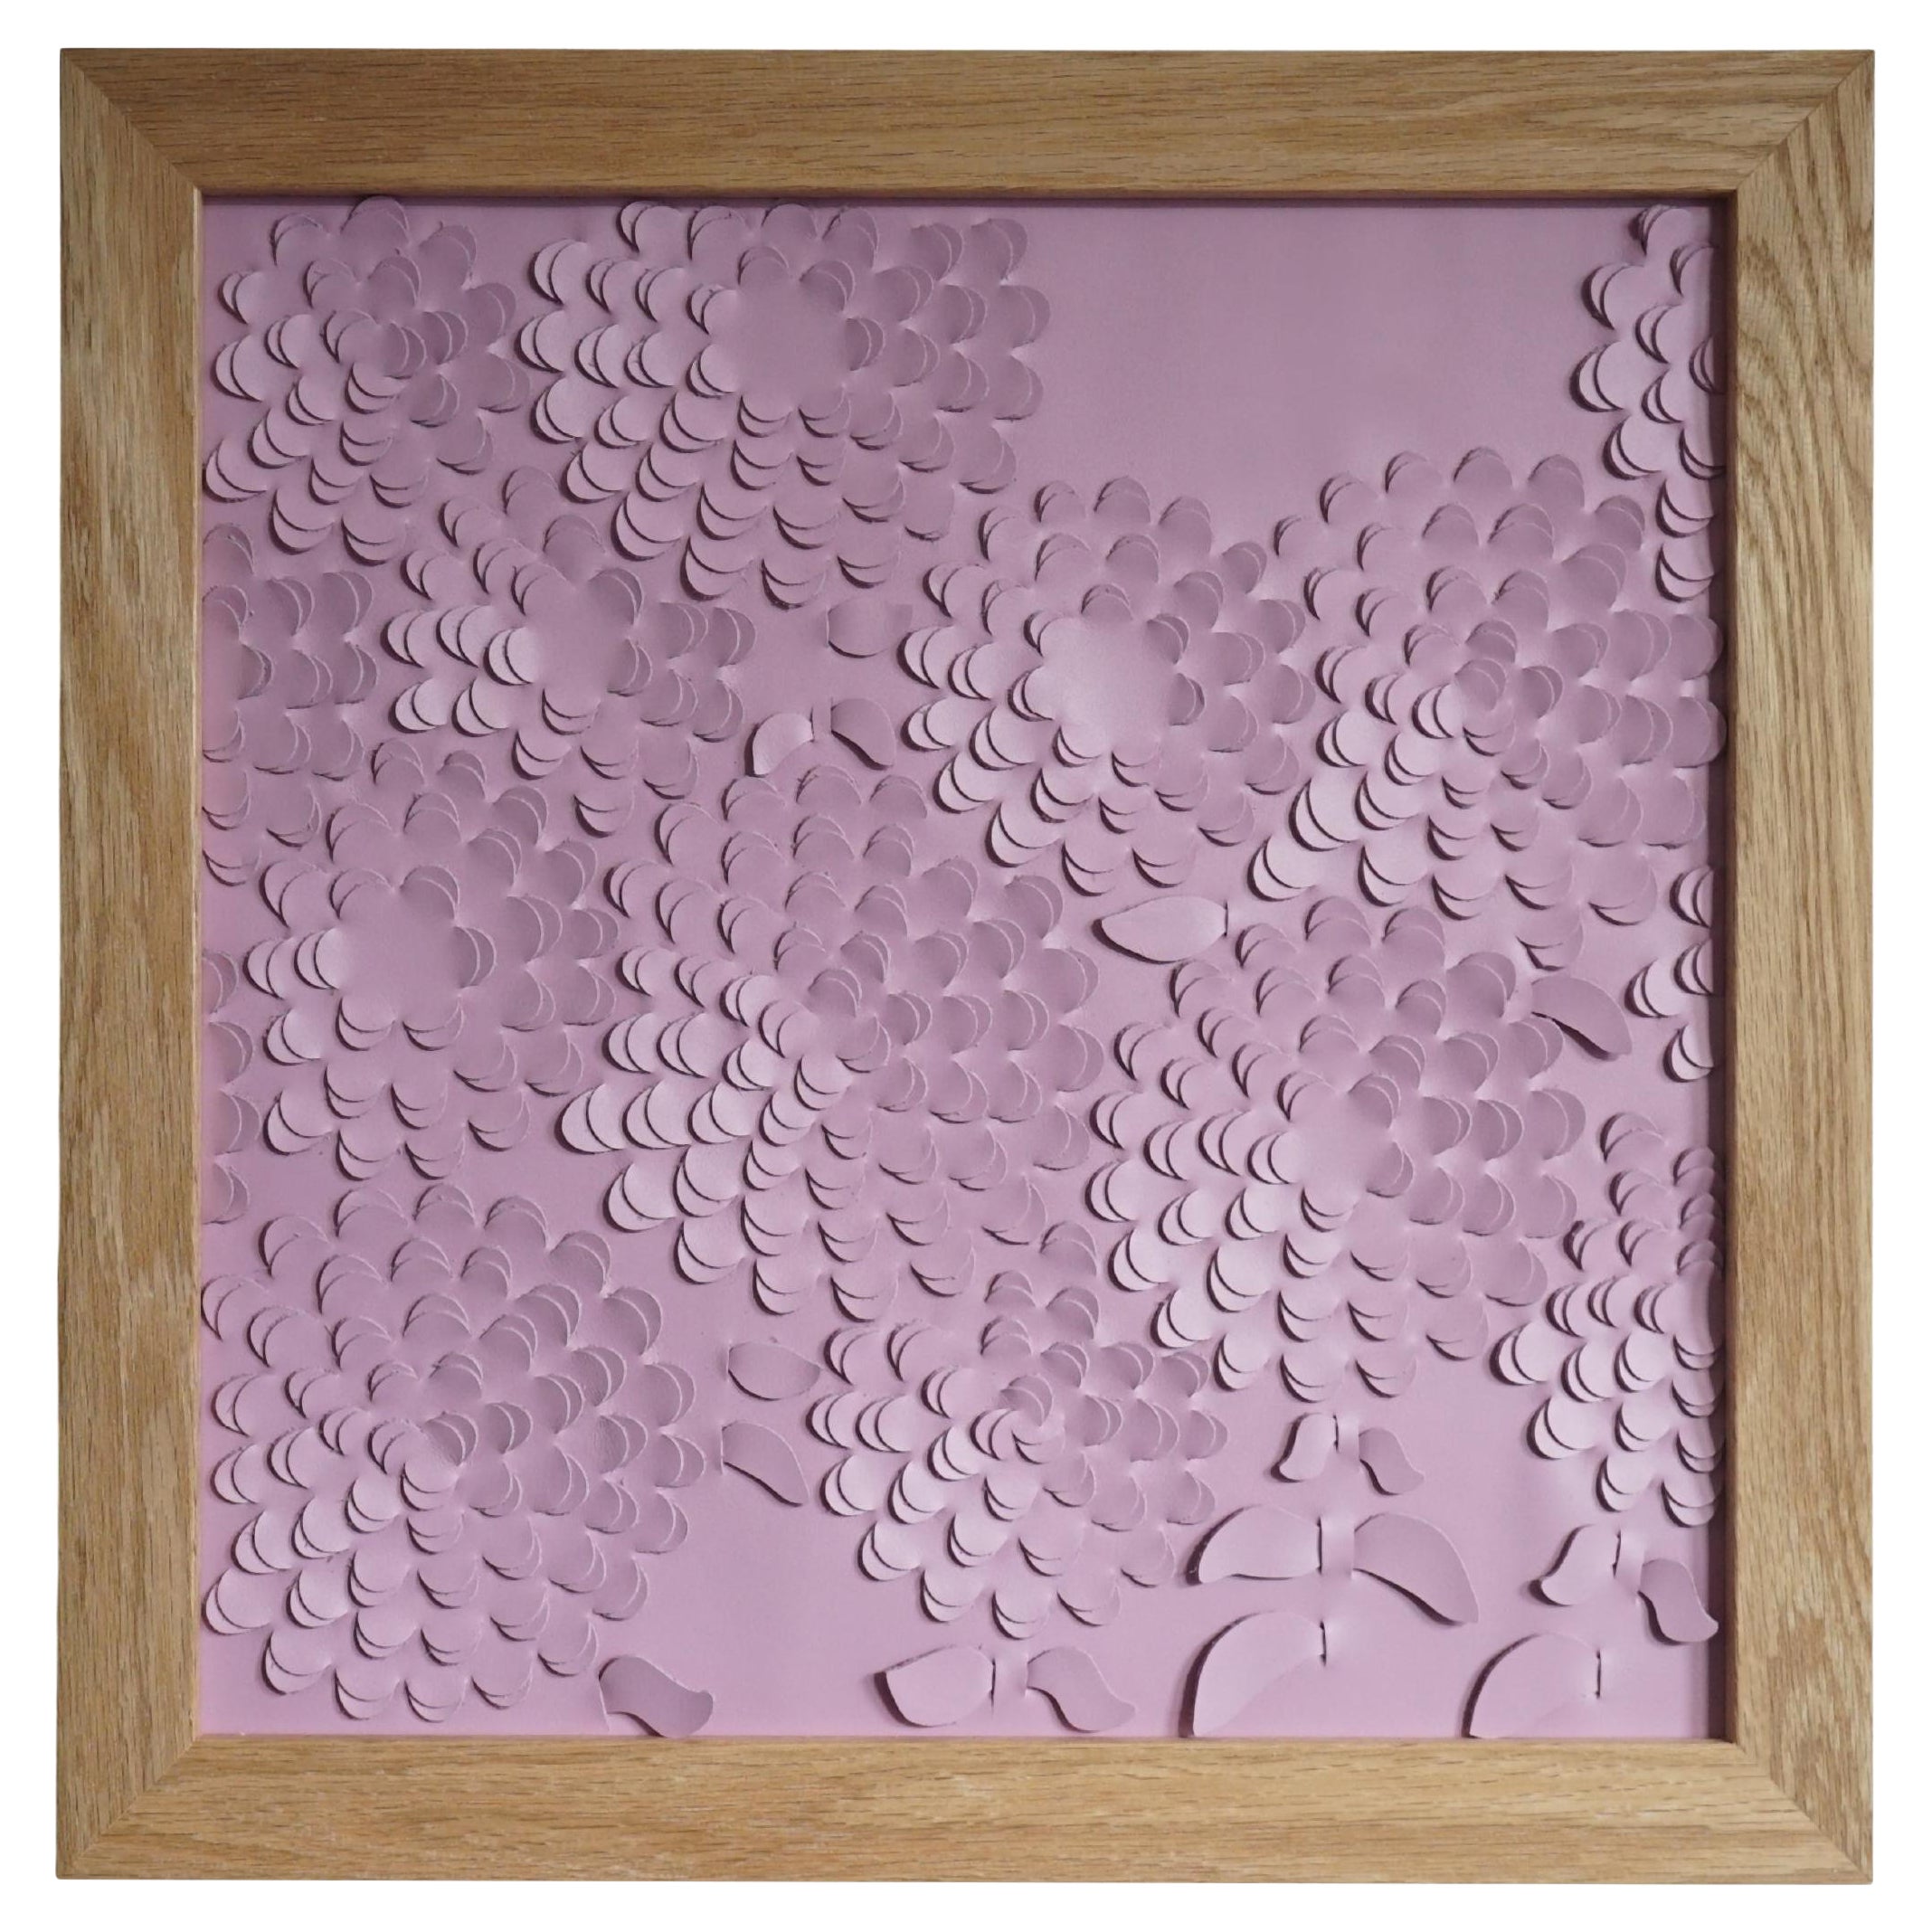 Chrysanthemum a Piece of 3D Sculptural Pink Leather Wall Art For Sale